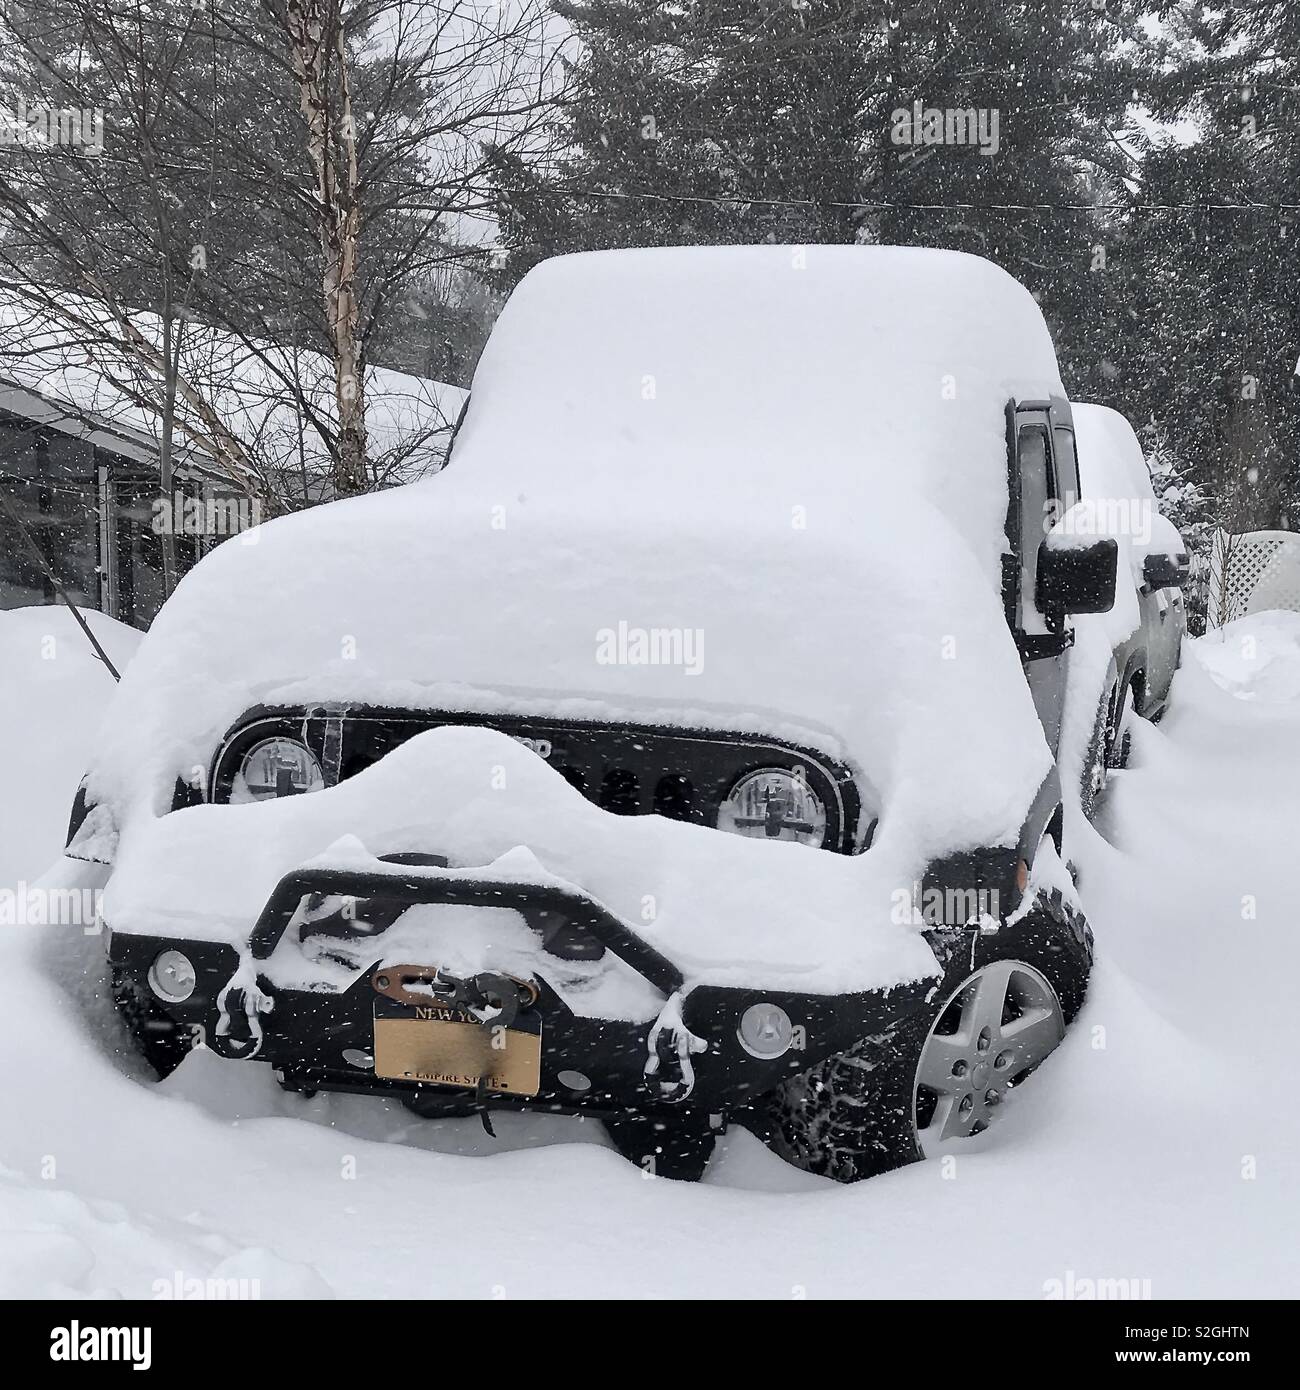 A black Jeep Wrangler covered with snow Stock Photo